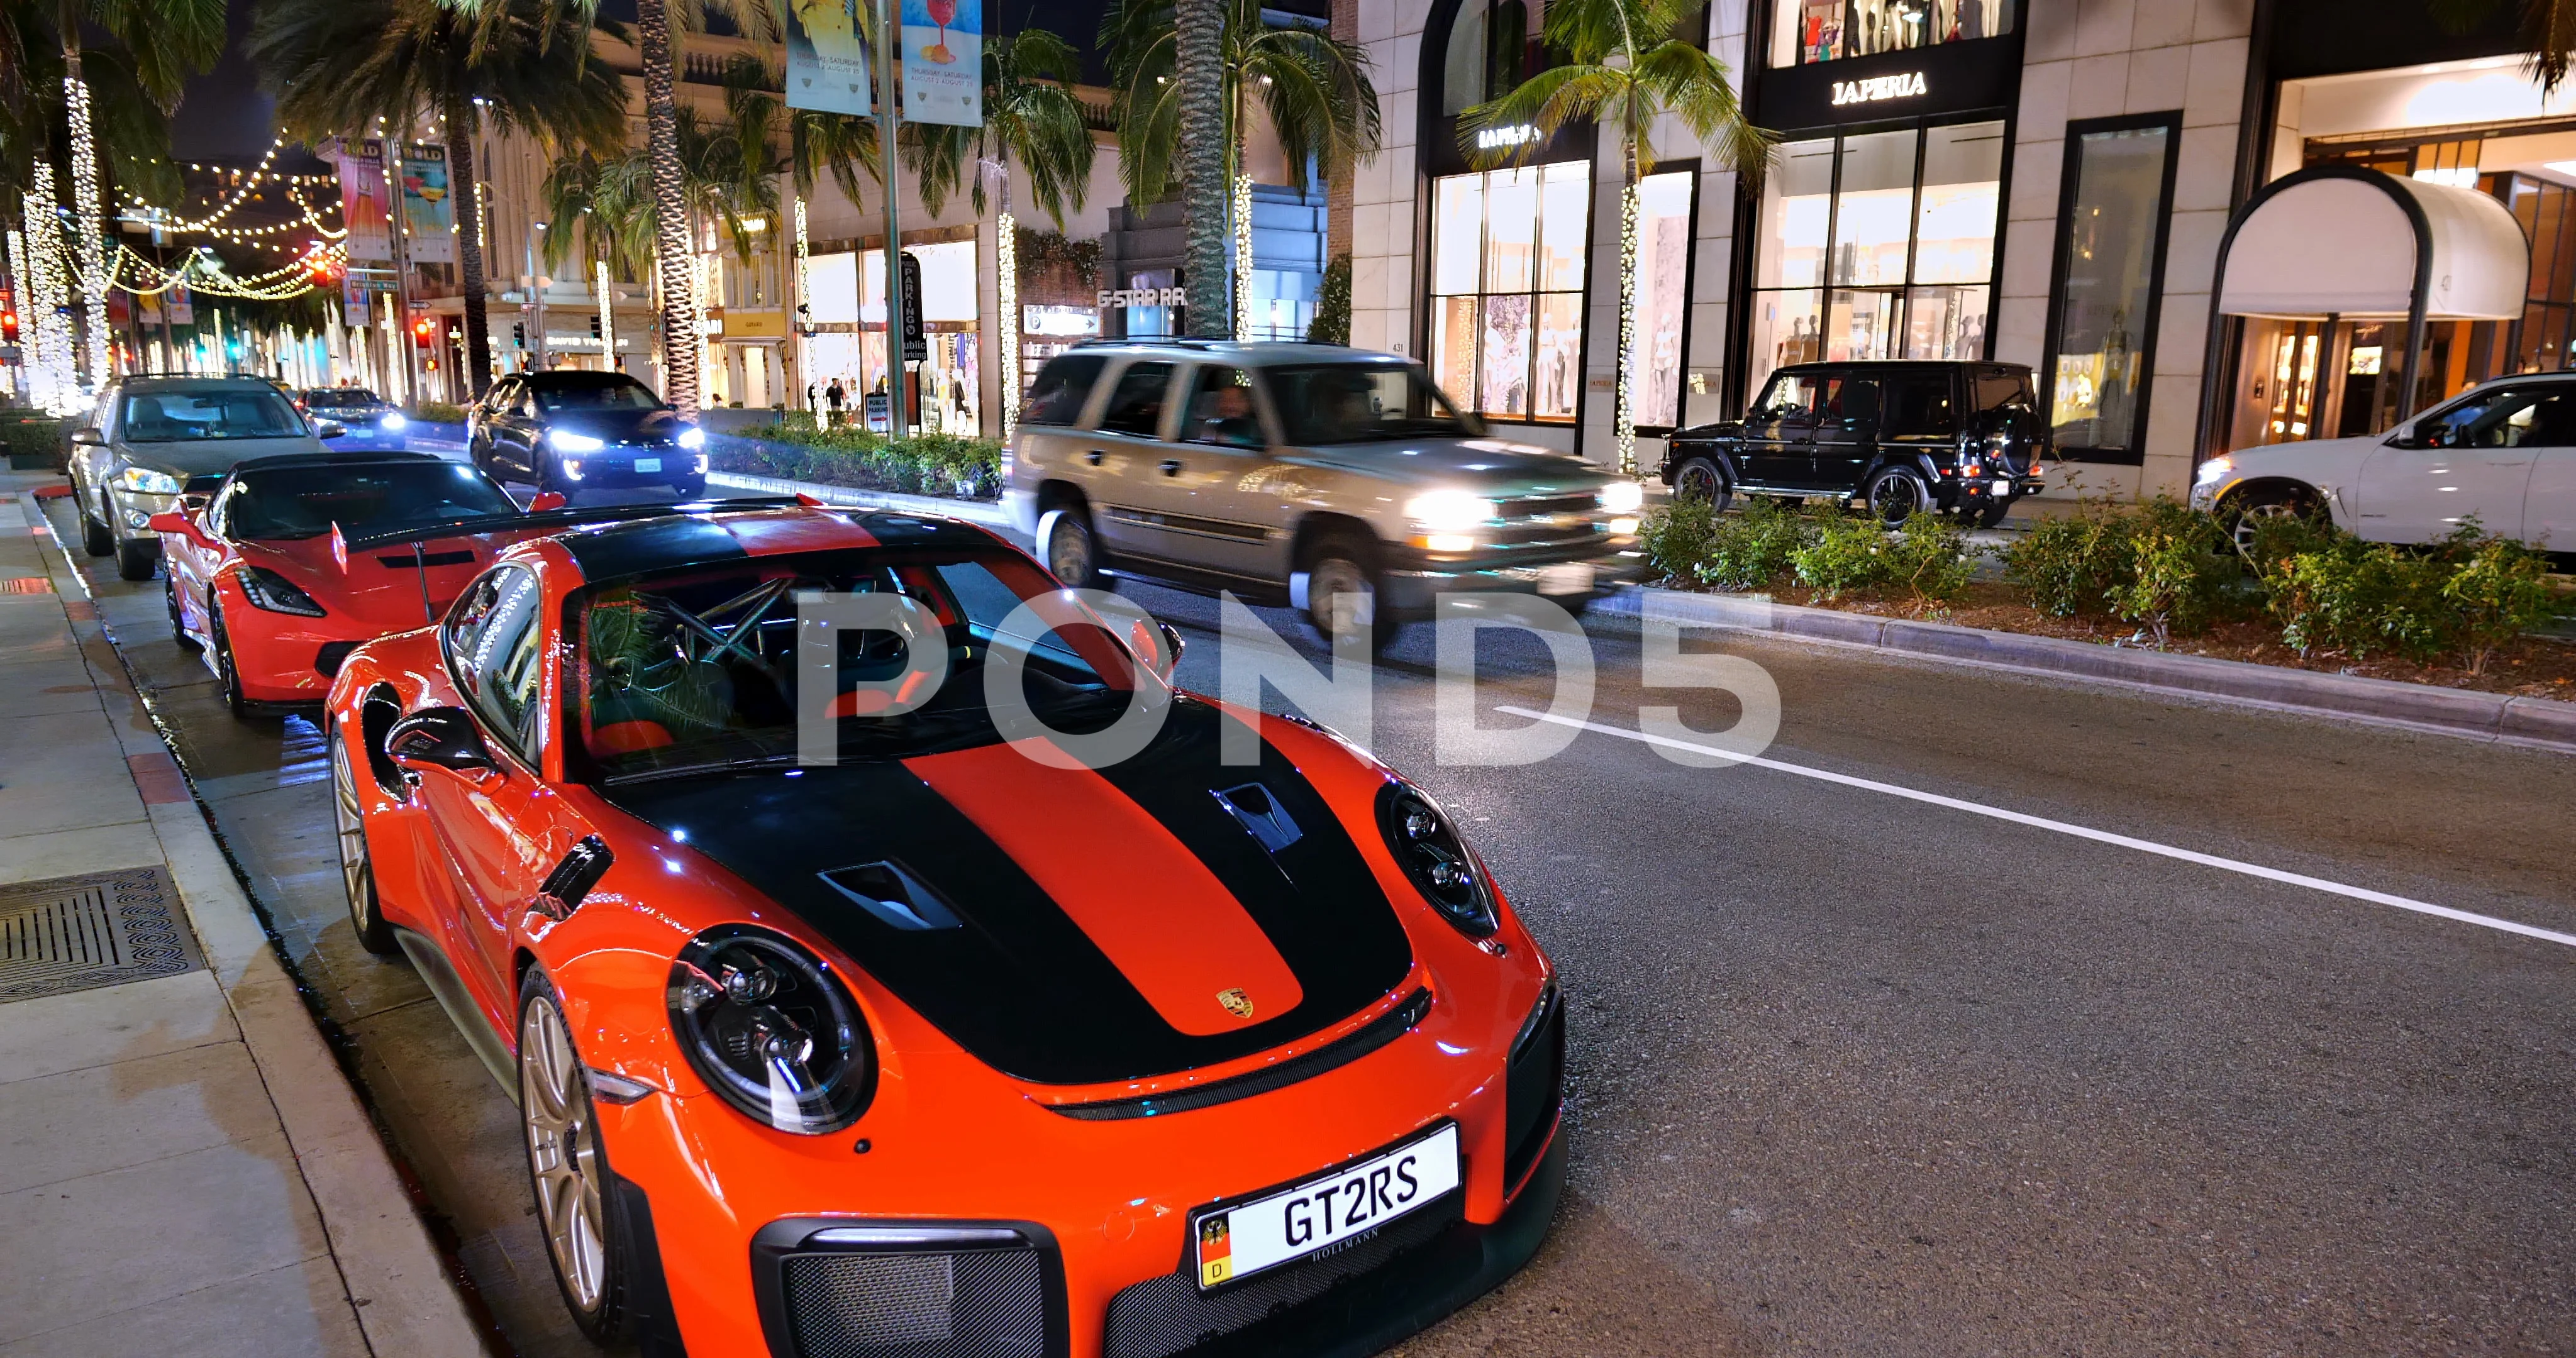 Luxury Sport Car on Rodeo Drive, Beverly, Stock Video